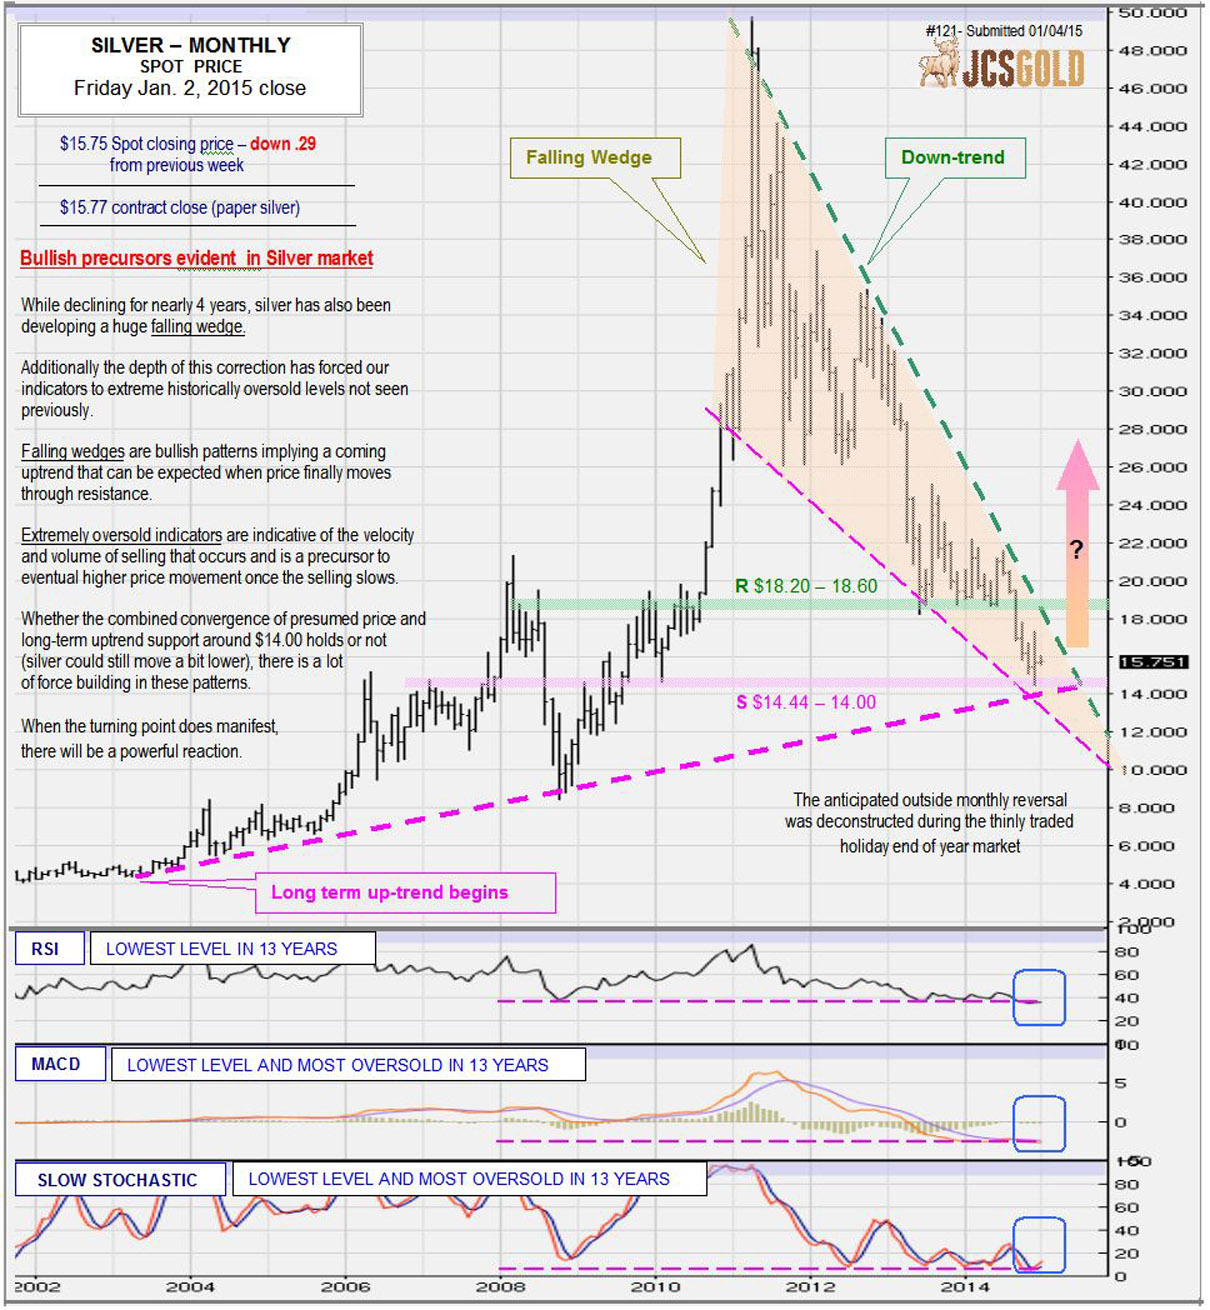 Jan 2, 2015 chart & commentary